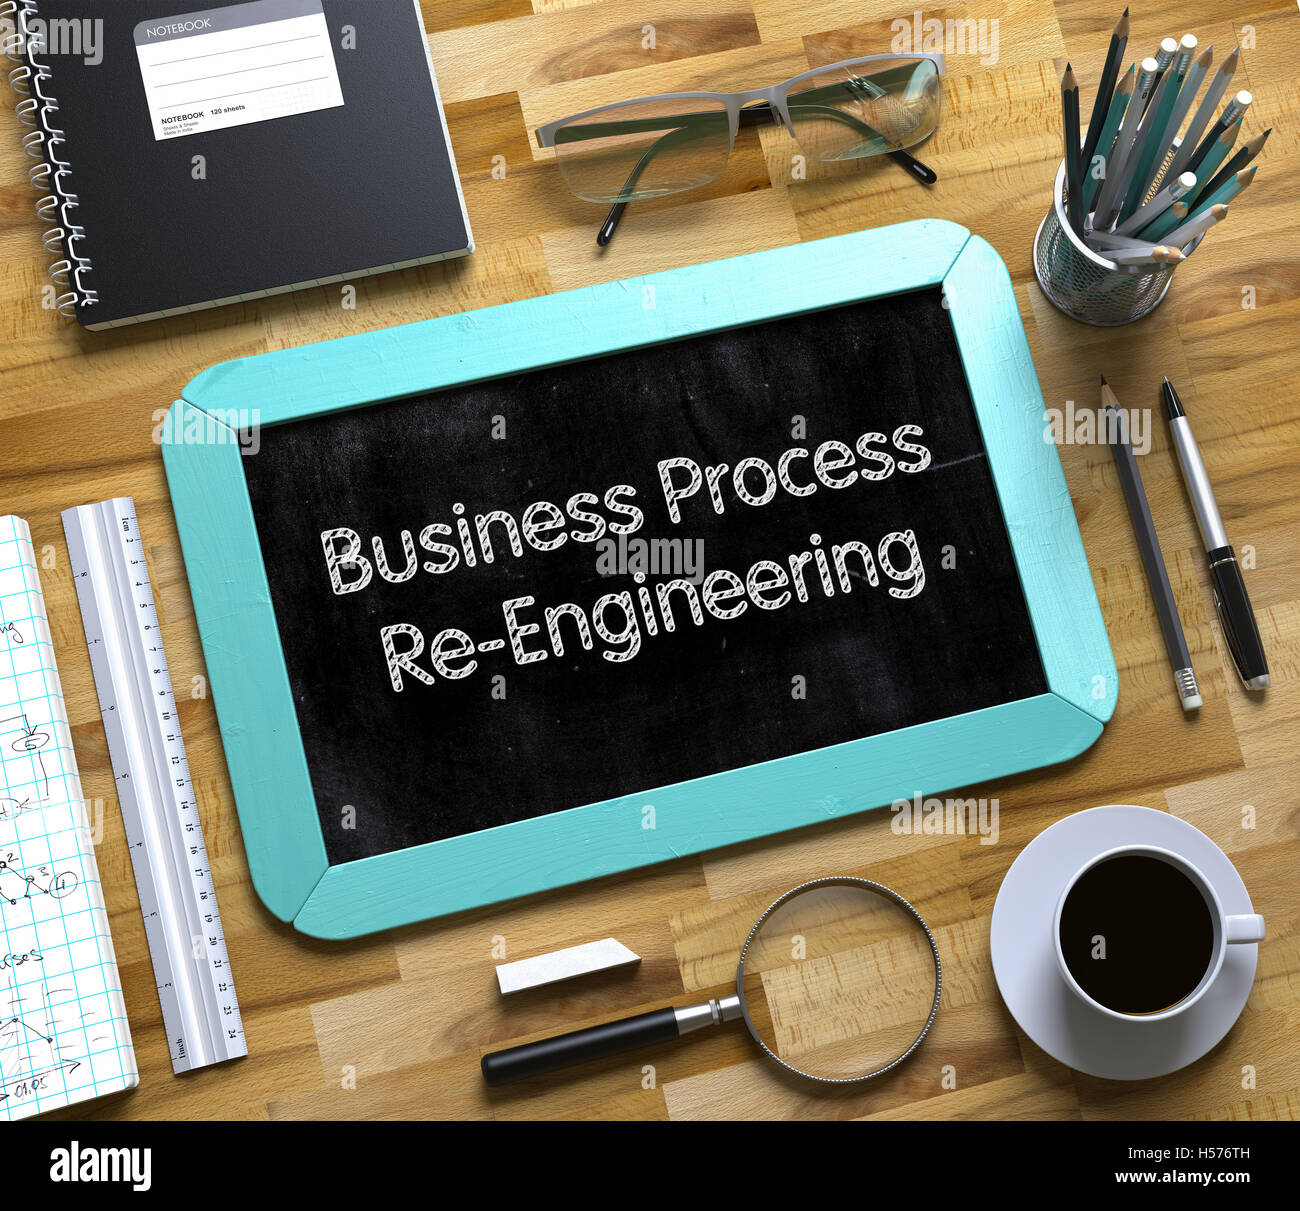 Business Process Re-Engineering on Small Chalkboard. 3D Render. Stock Photo